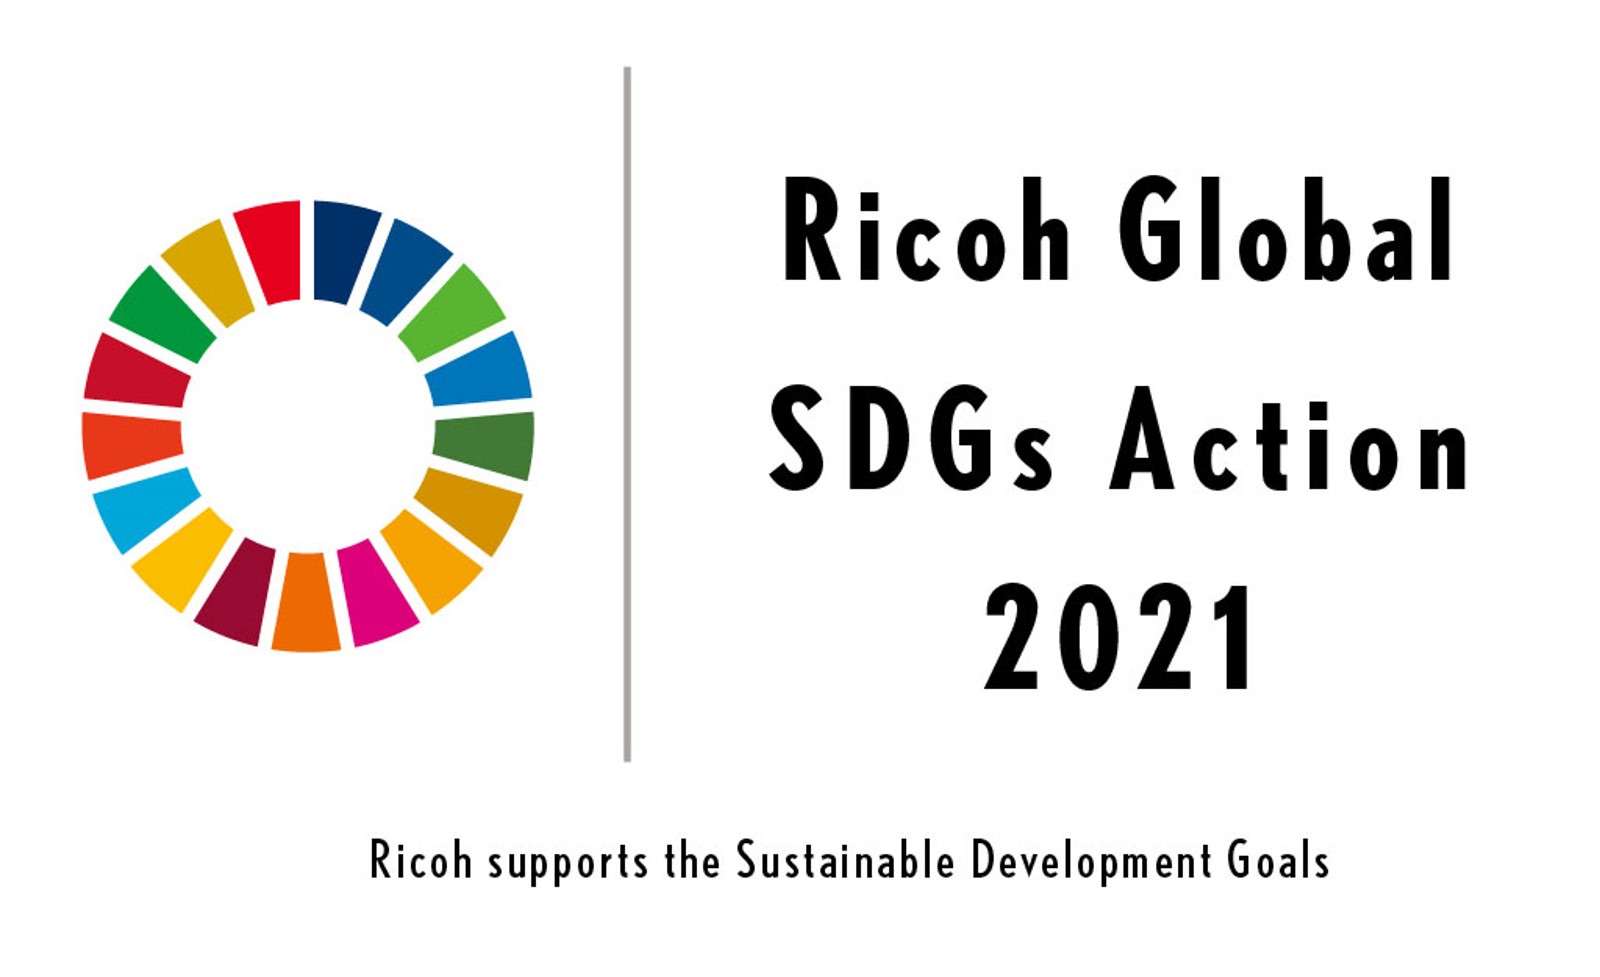 Ricoh launches annual Global SDGs Action Month to encourage widespread contributions to sustainable development